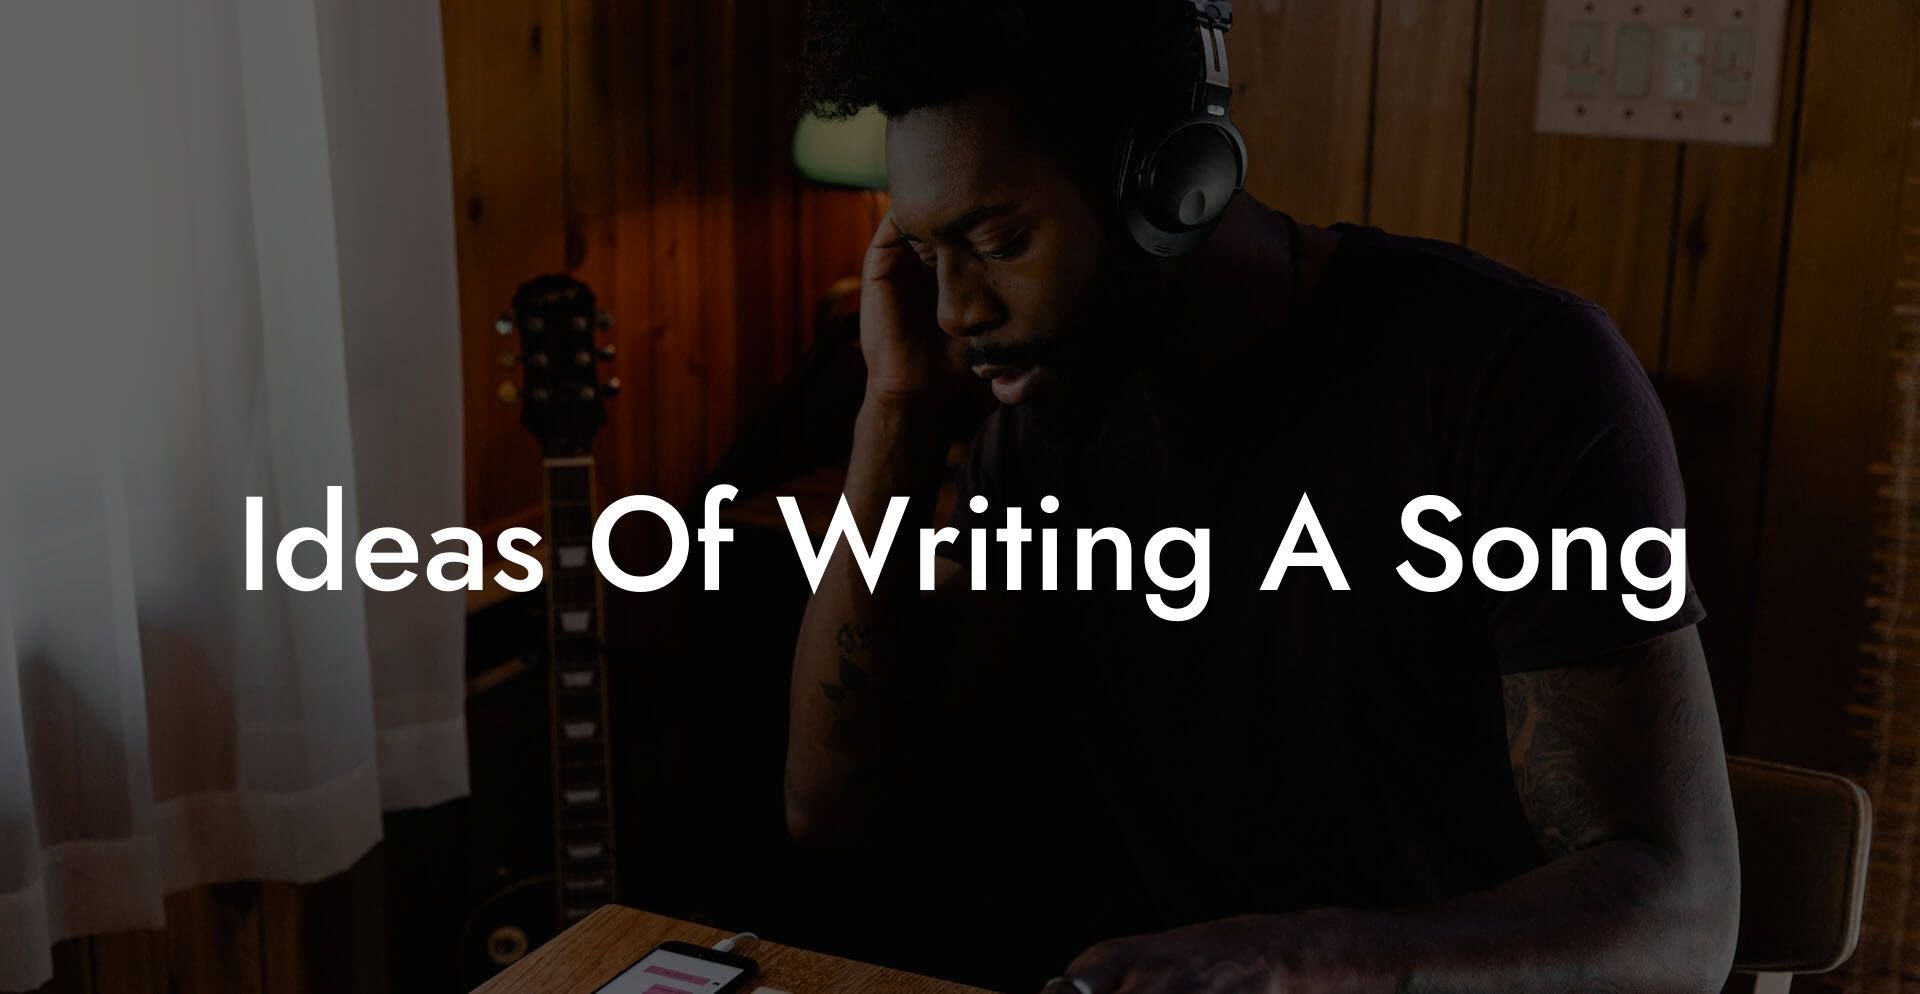 ideas of writing a song lyric assistant